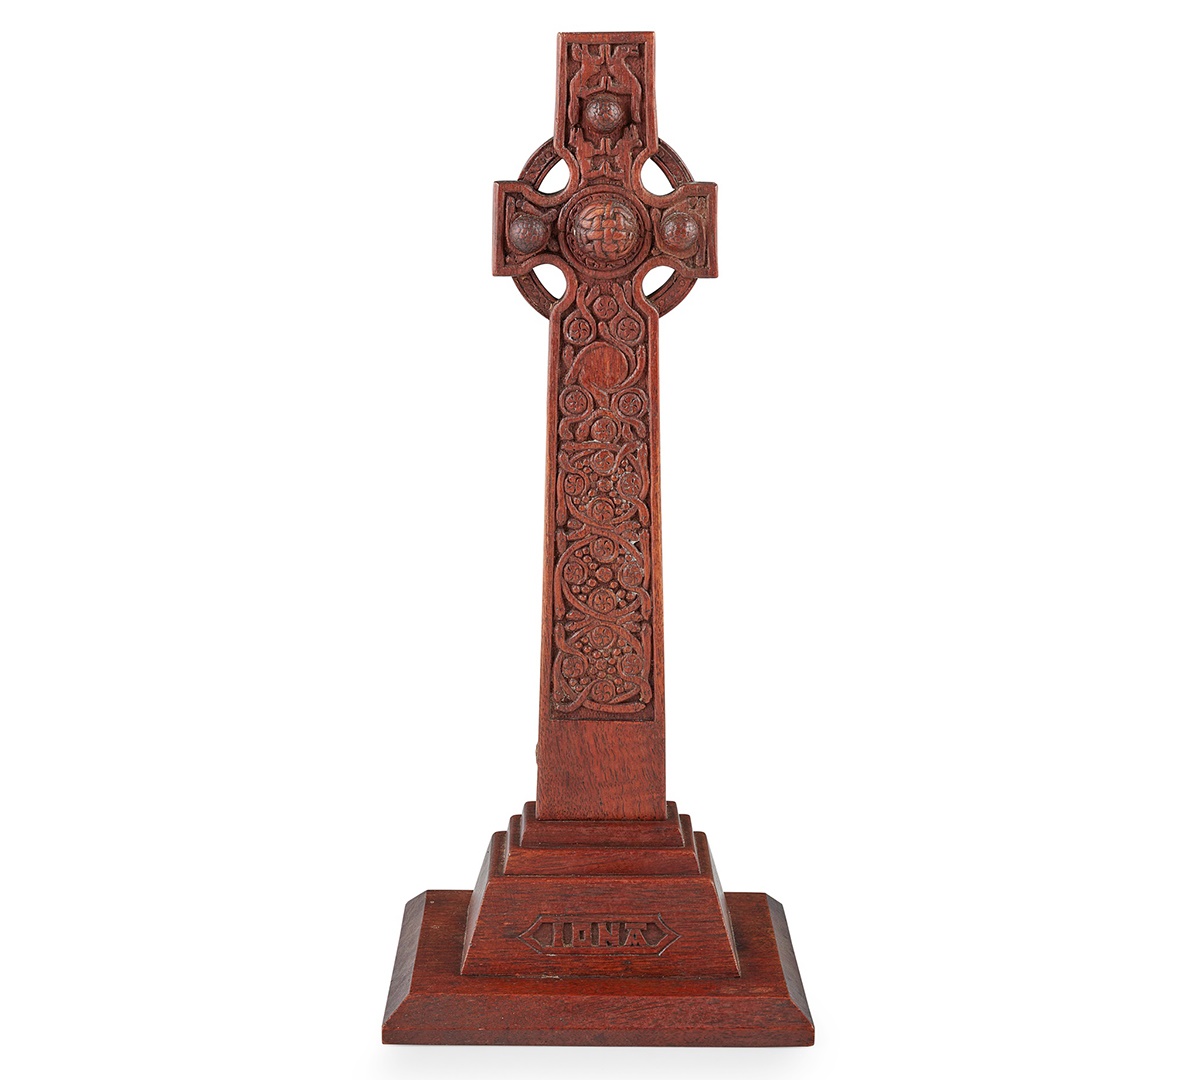 LOT 241 | IONA - A SCOTTISH PROVINCIAL OAK CROSS | ATTRIBUTED ALEXANDER RITCHIE | £600 - £800 + fees